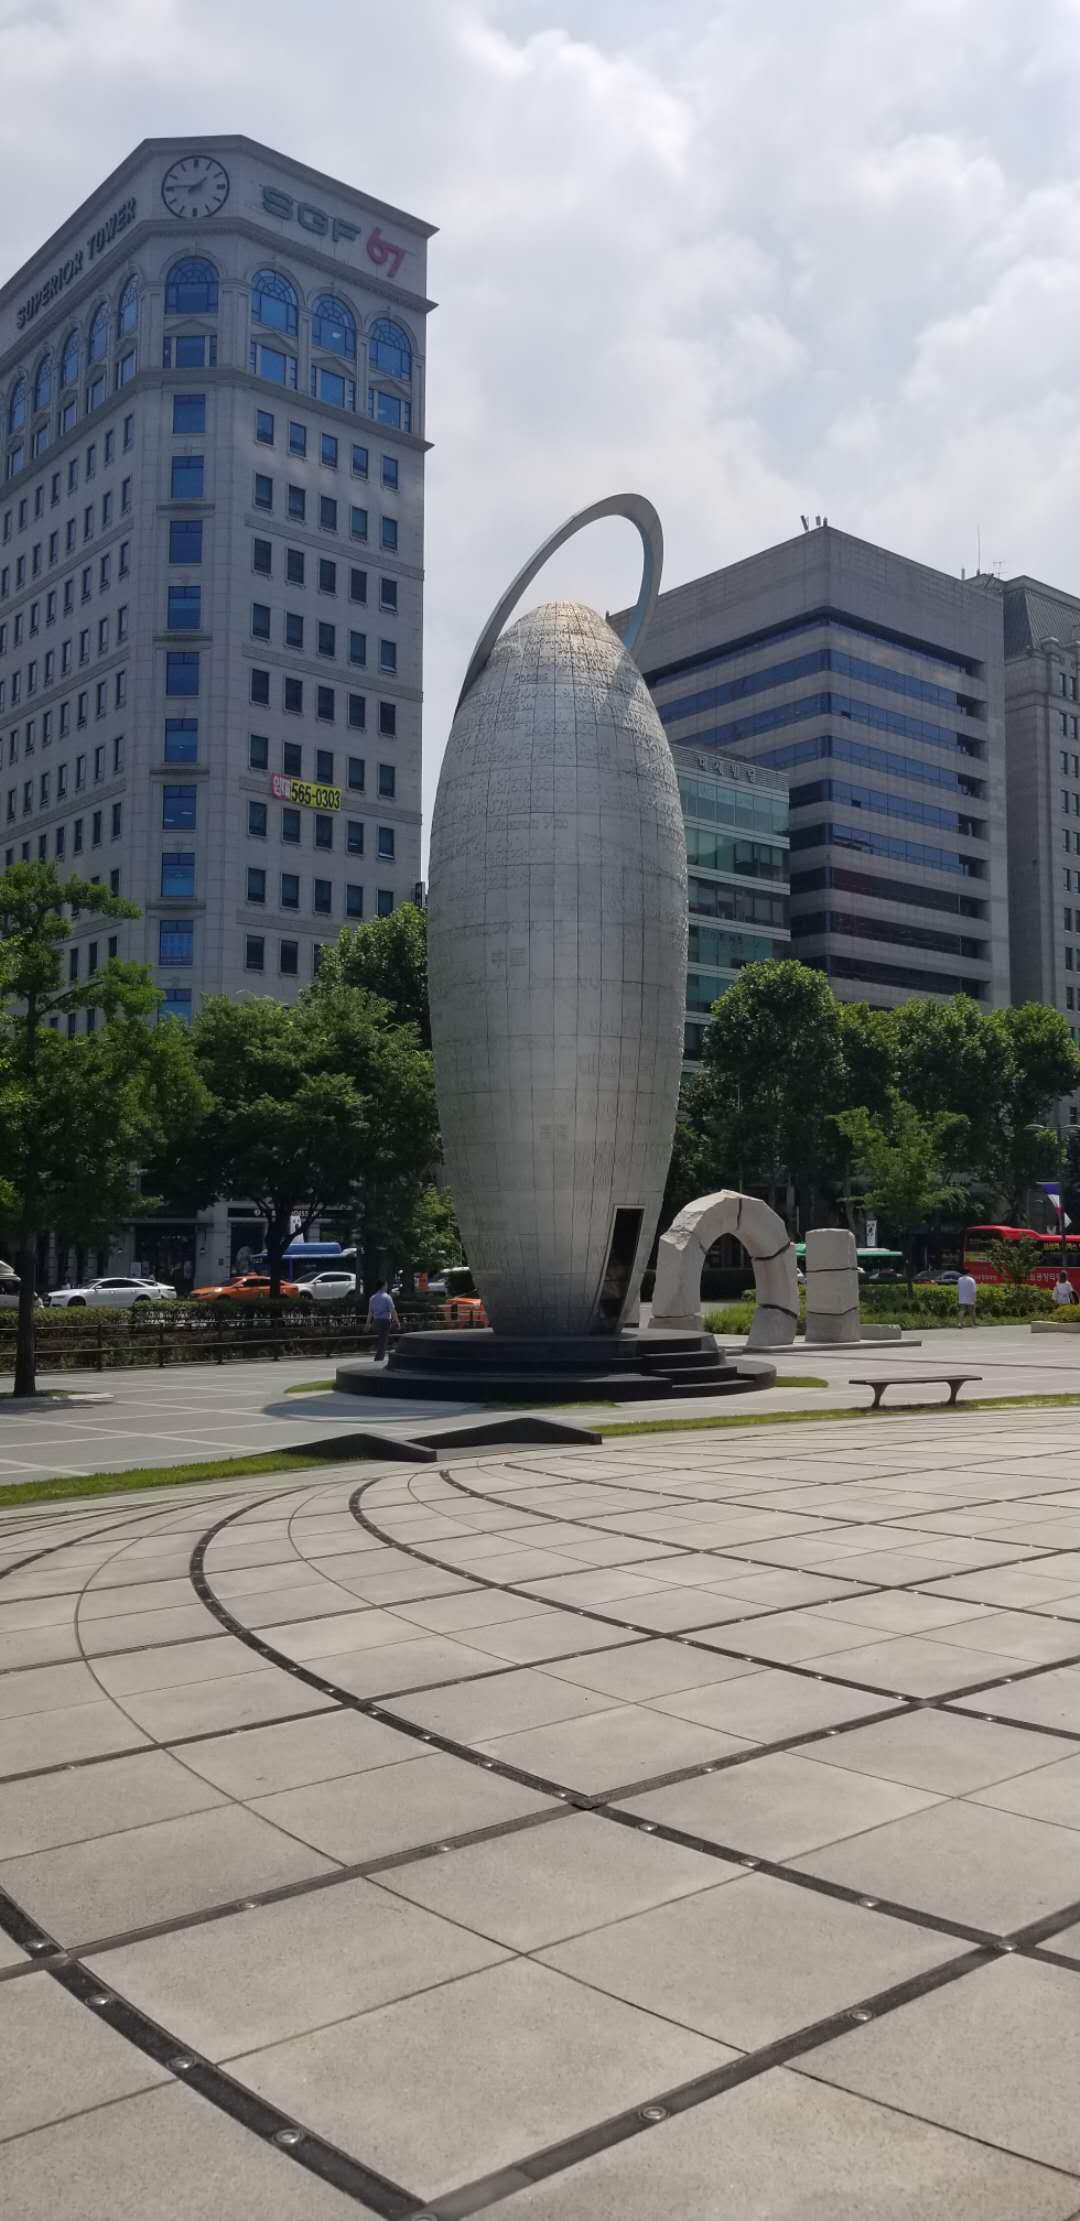 One of the sculptures outside the Seoul World Trade Center